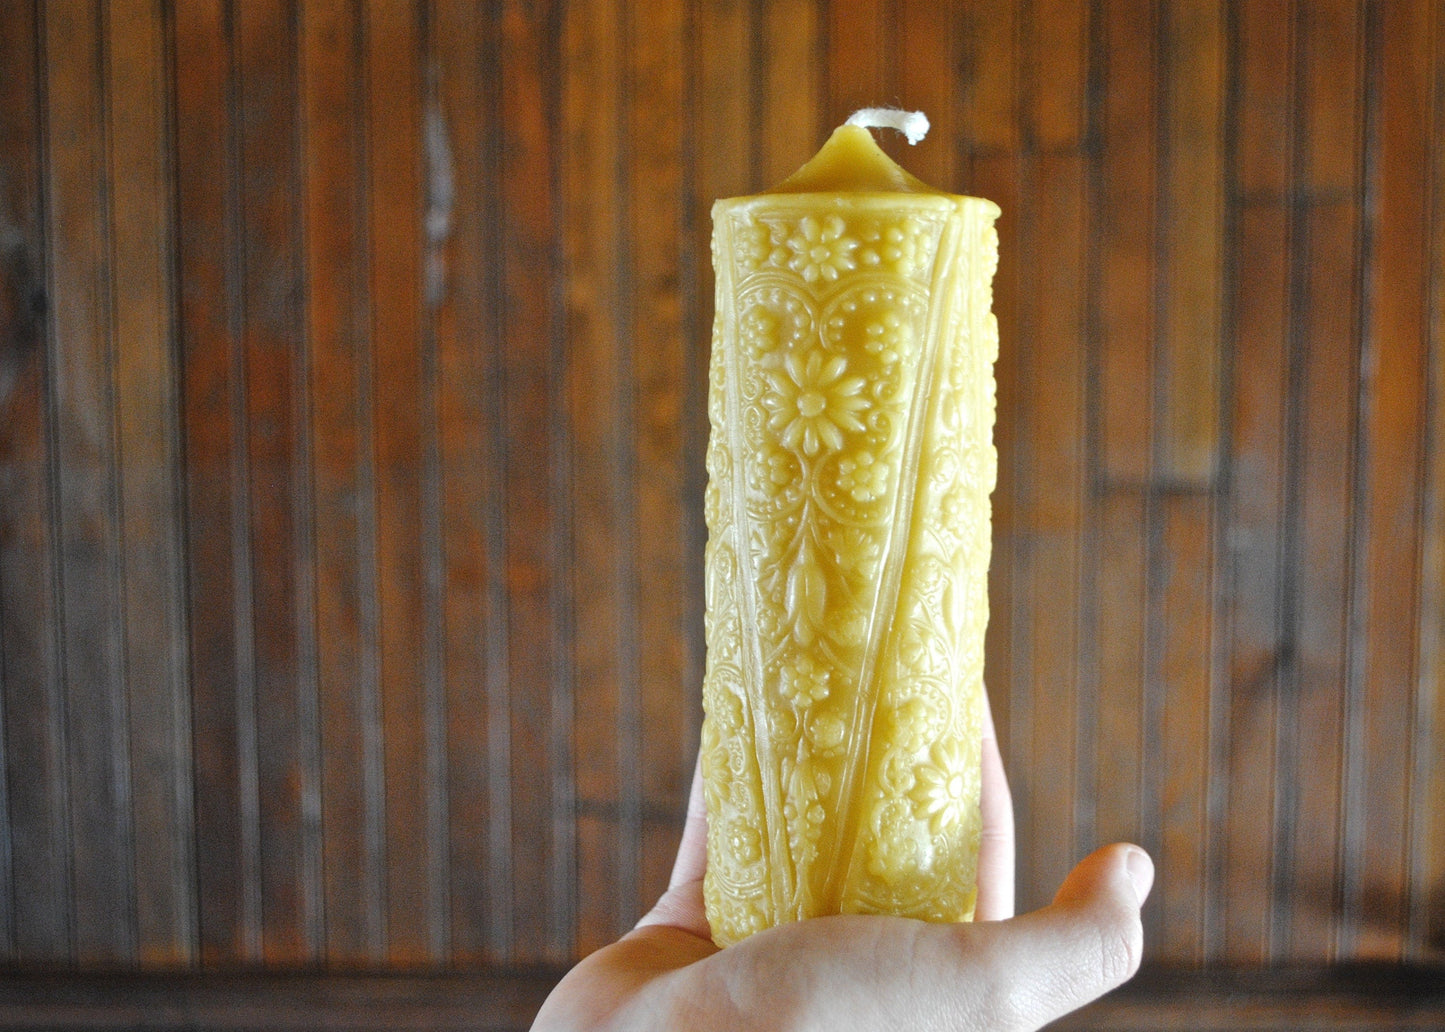 Instant COLLECTION - Beeswax Candles - Pure 100% Beeswax - Candles Collection - Pillars, Antique Bottle Candles